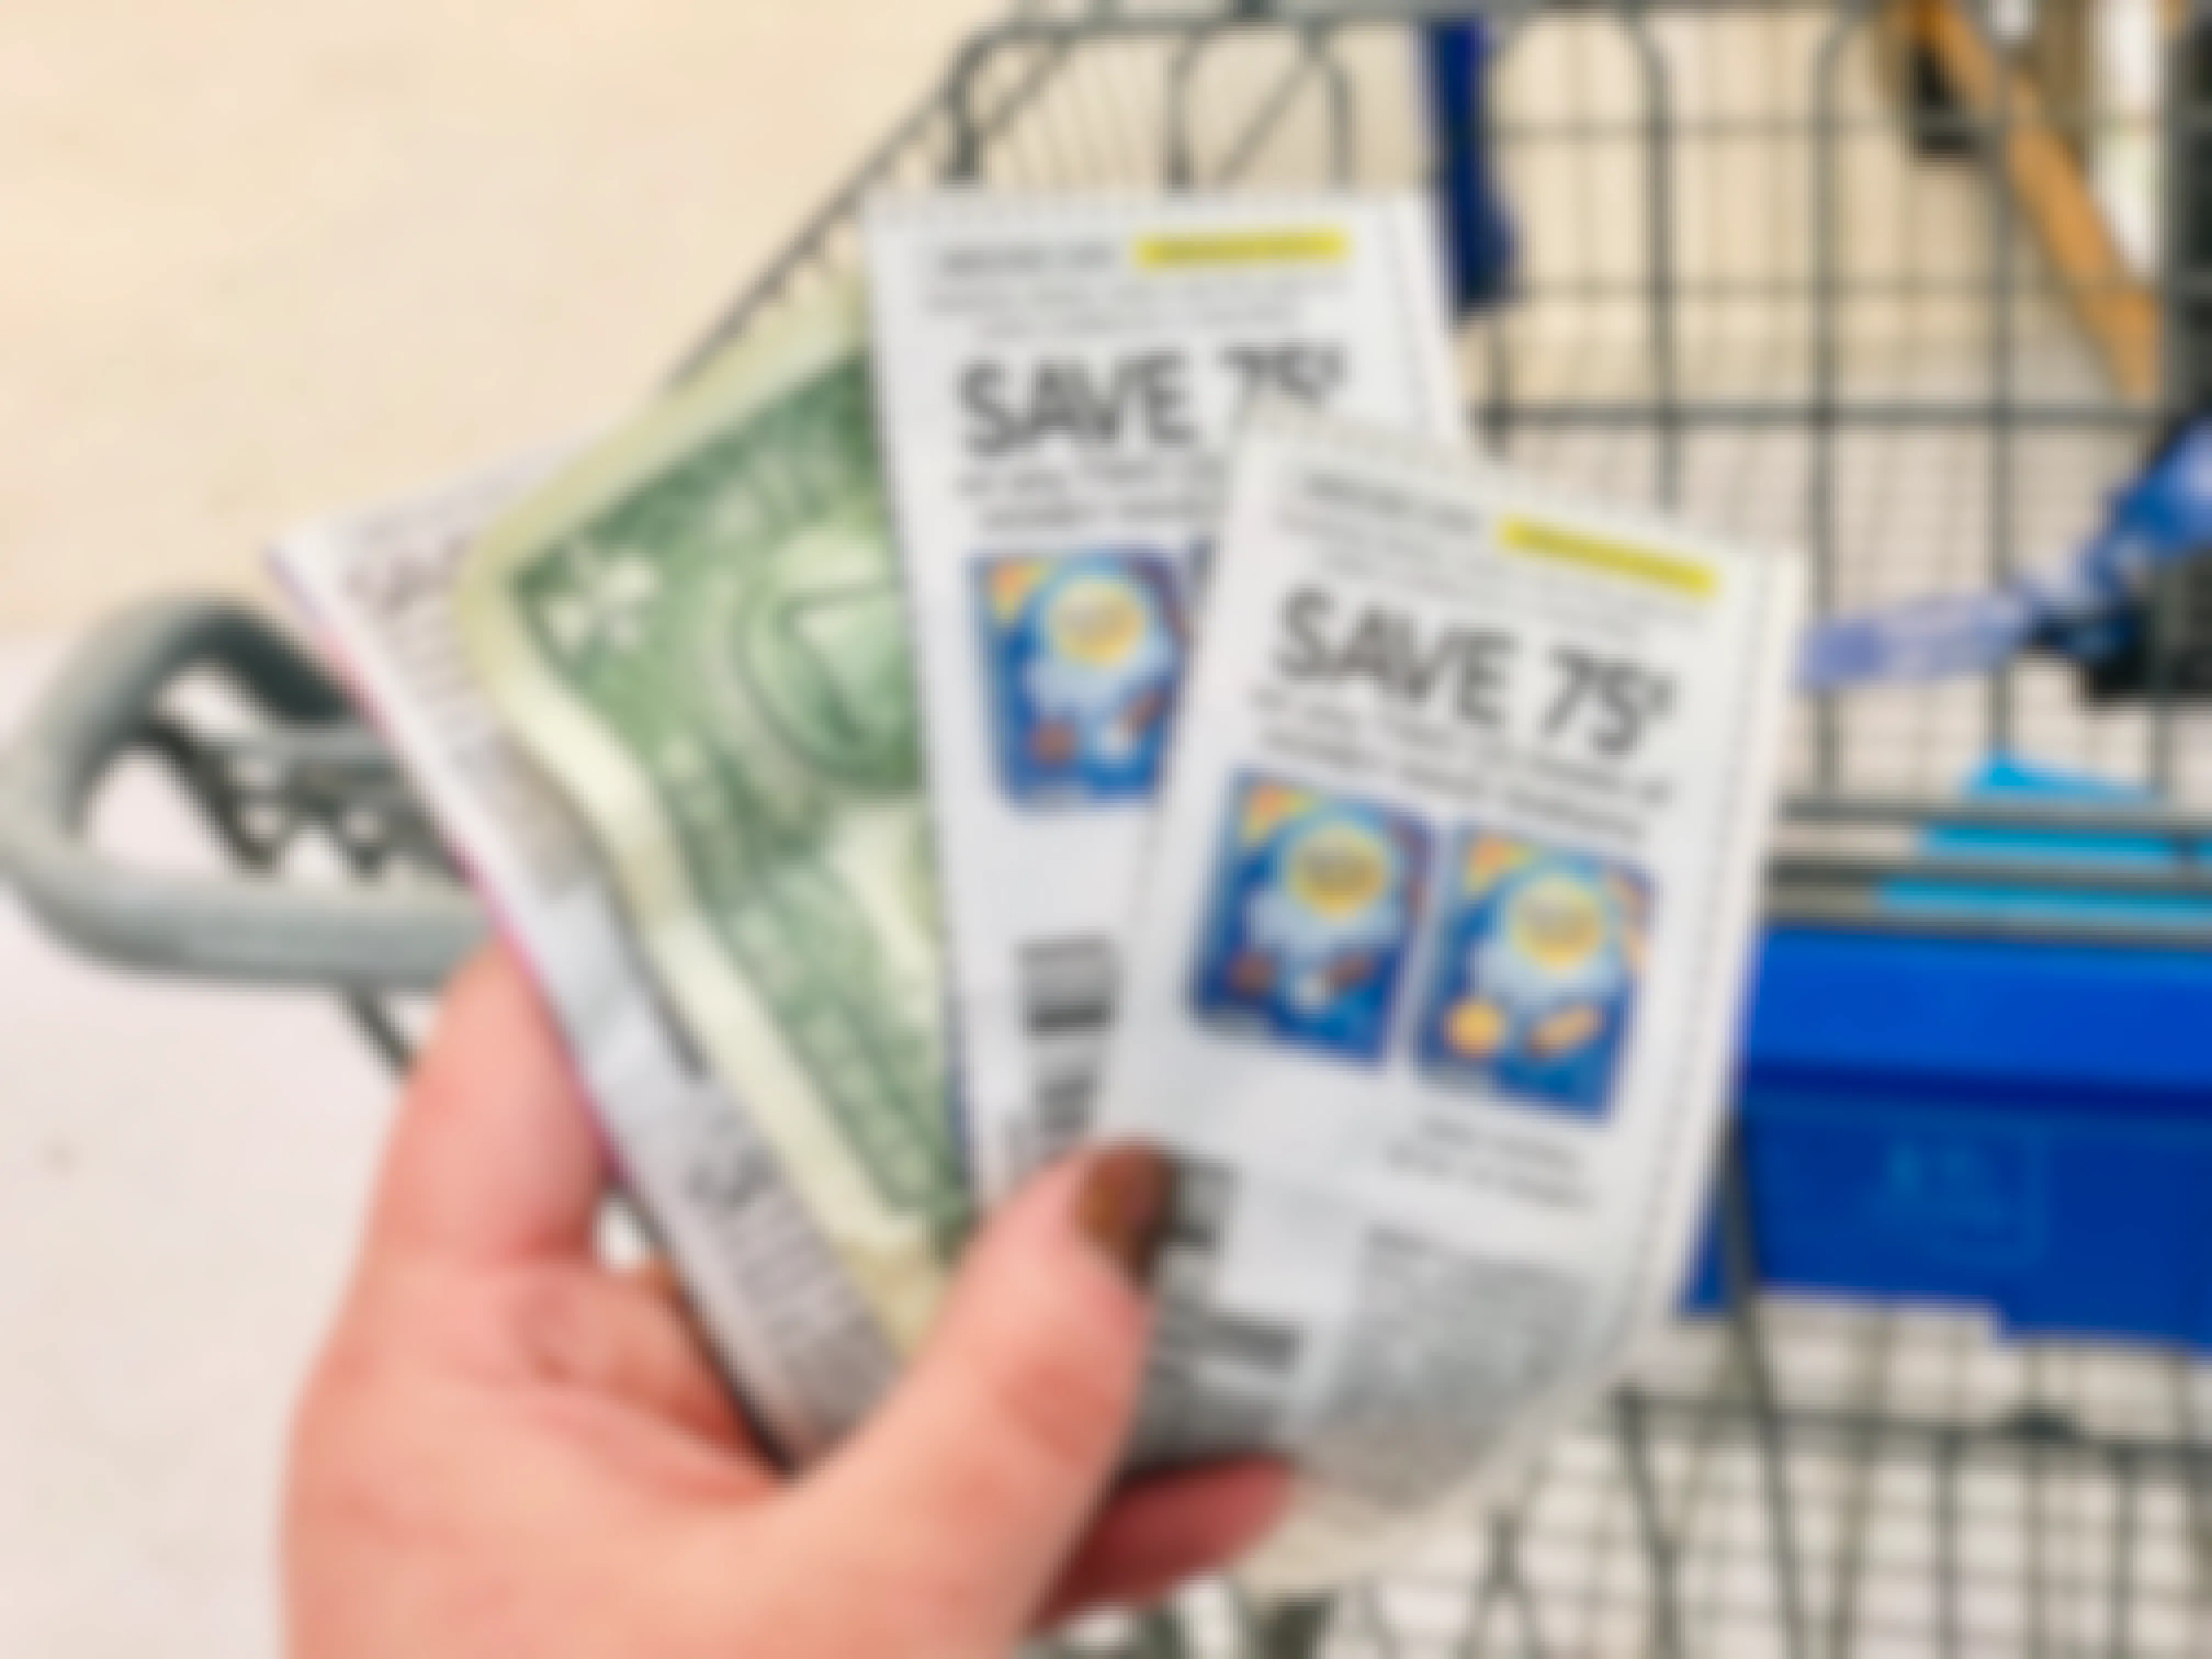 How to Make Money with Coupons